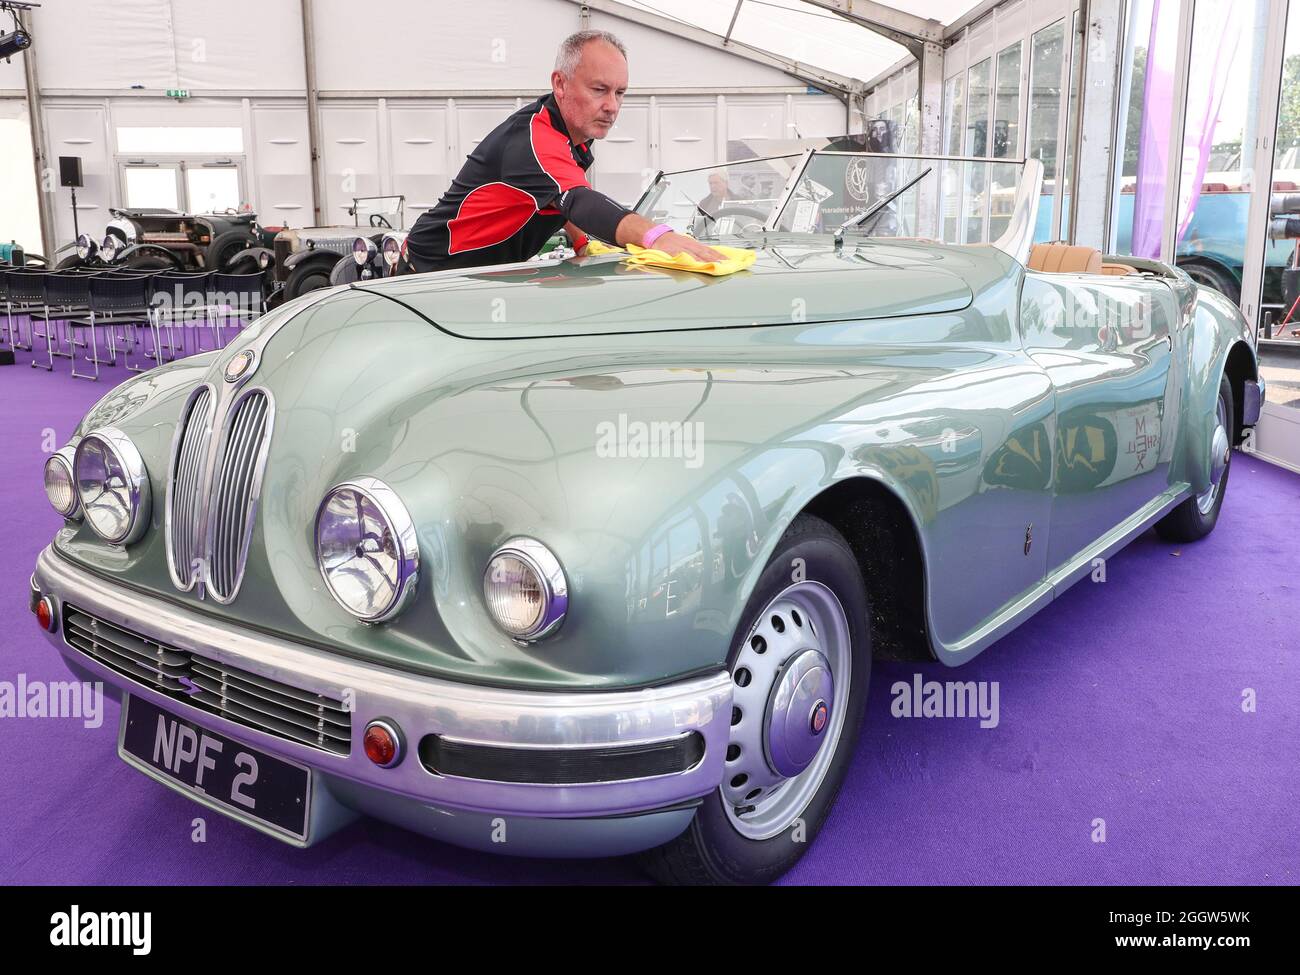 Beaulieu, Hampshire, UK 3rd September 2021. Jonathan Underwood gives a final polish to rare 1949 Bristol 402 Drophead Coupé formally owned by Hollywood actress Jean Simmons, which is to be offered at auction at the Bonhams MPH Beaulieu Sale this Sunday, with an estimate of £150,000 – 200,000. One of the most glamorous luxury motor cars of its day, the Bristol was bought new for the Hollywood actress by her future husband and fellow star Stewart Granger as one of a matching pair. Credit: Stuart Martin/Alamy Live News Stock Photo